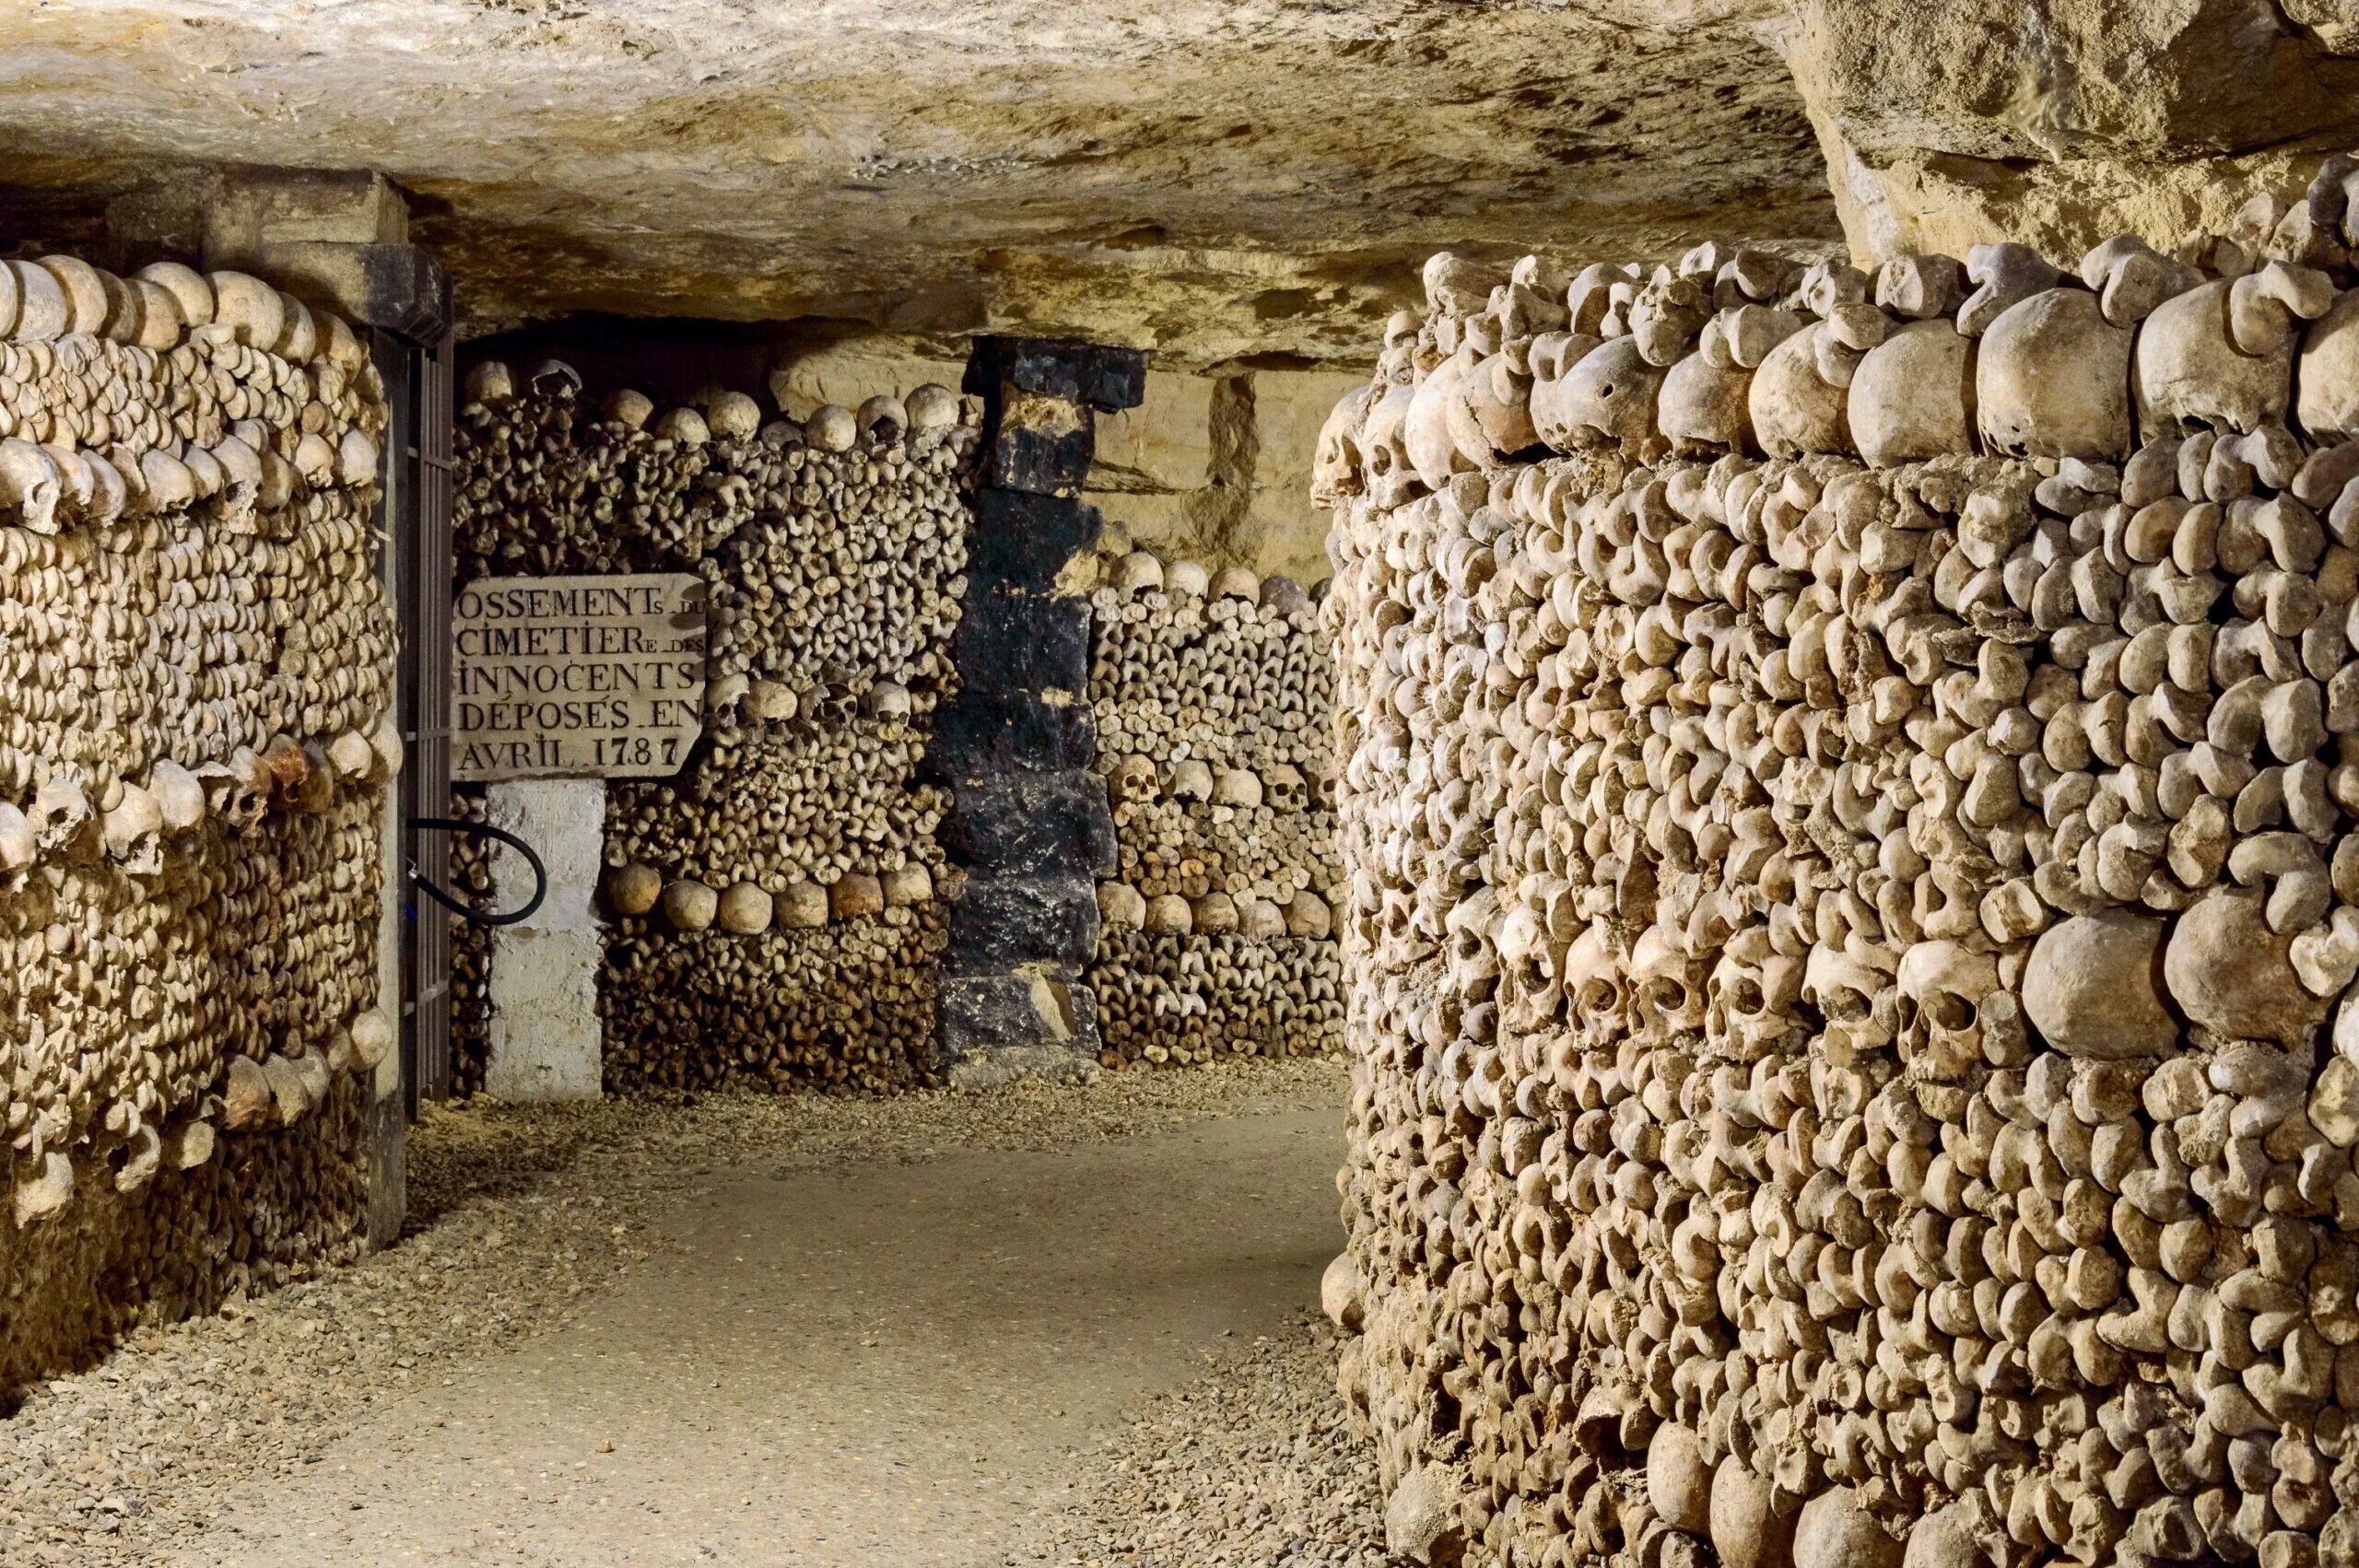 The catacombs of solaris revisited. Оссуарий Париж катакомбы. Катакомбы Парижа (Catacombs of Paris), Франция. Парижские катакомбы Франция черепа.